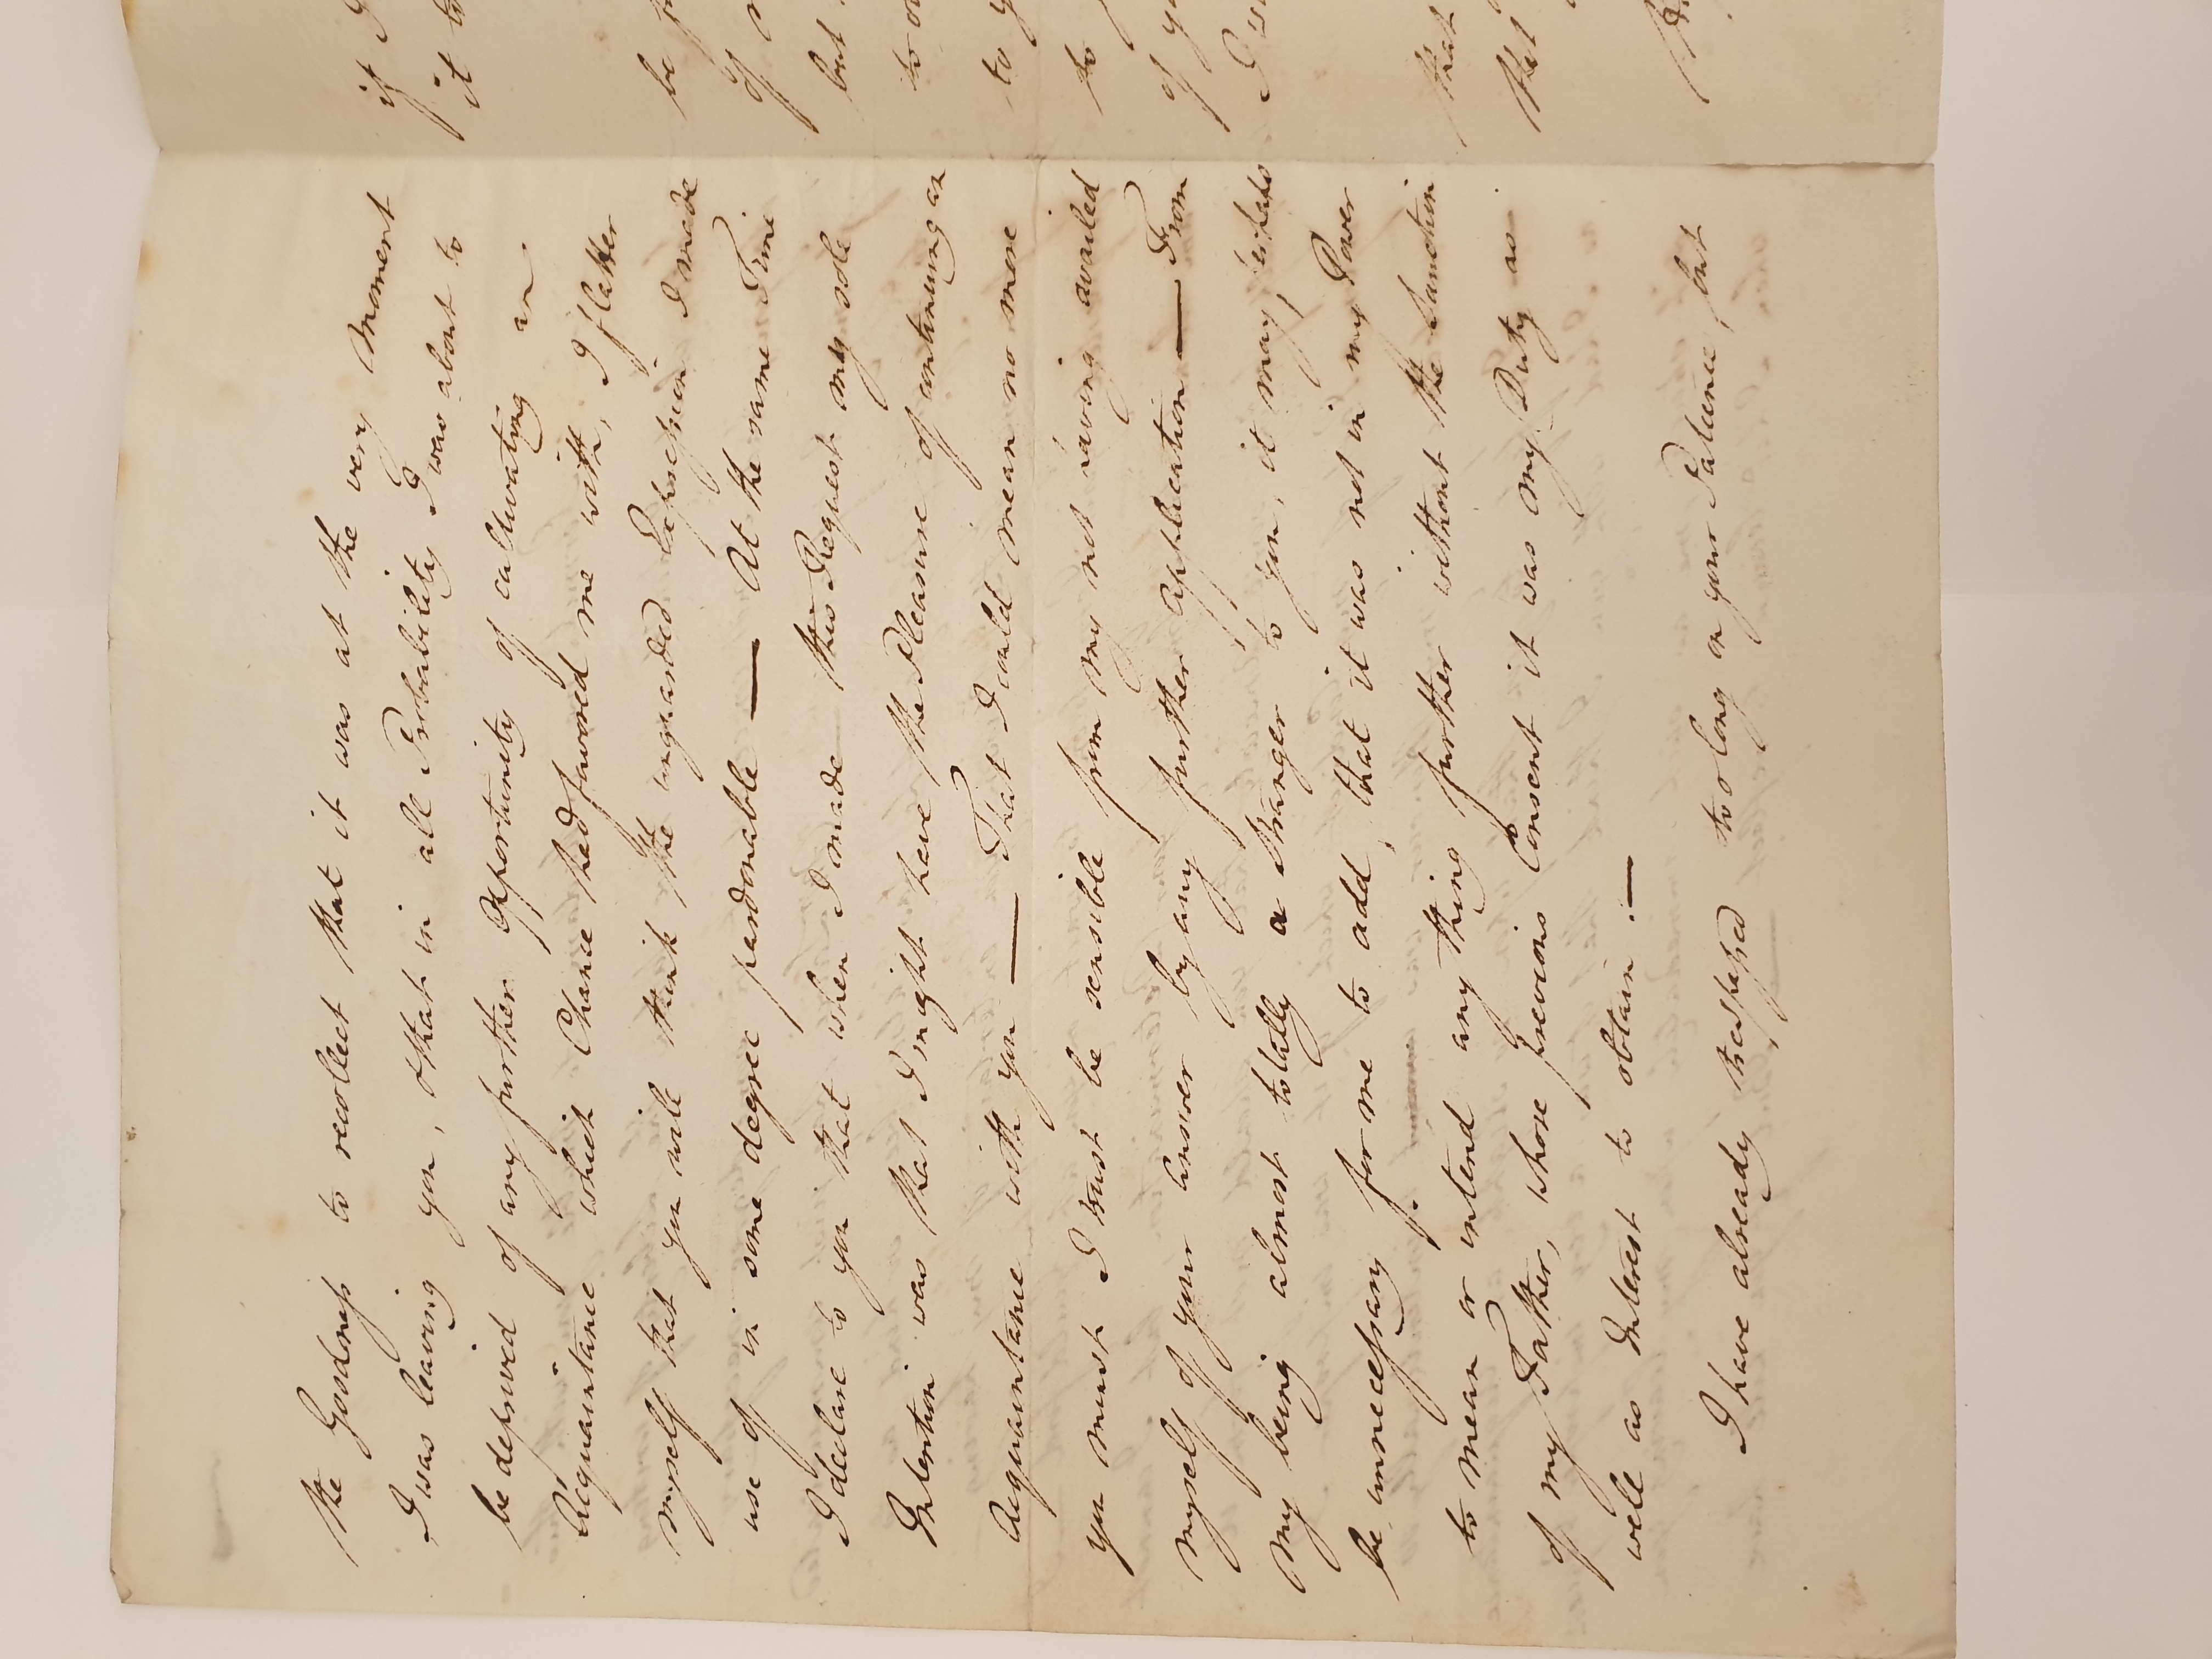 Image #2 of letter: William Grey to Ann Heatley, 31 October 1787